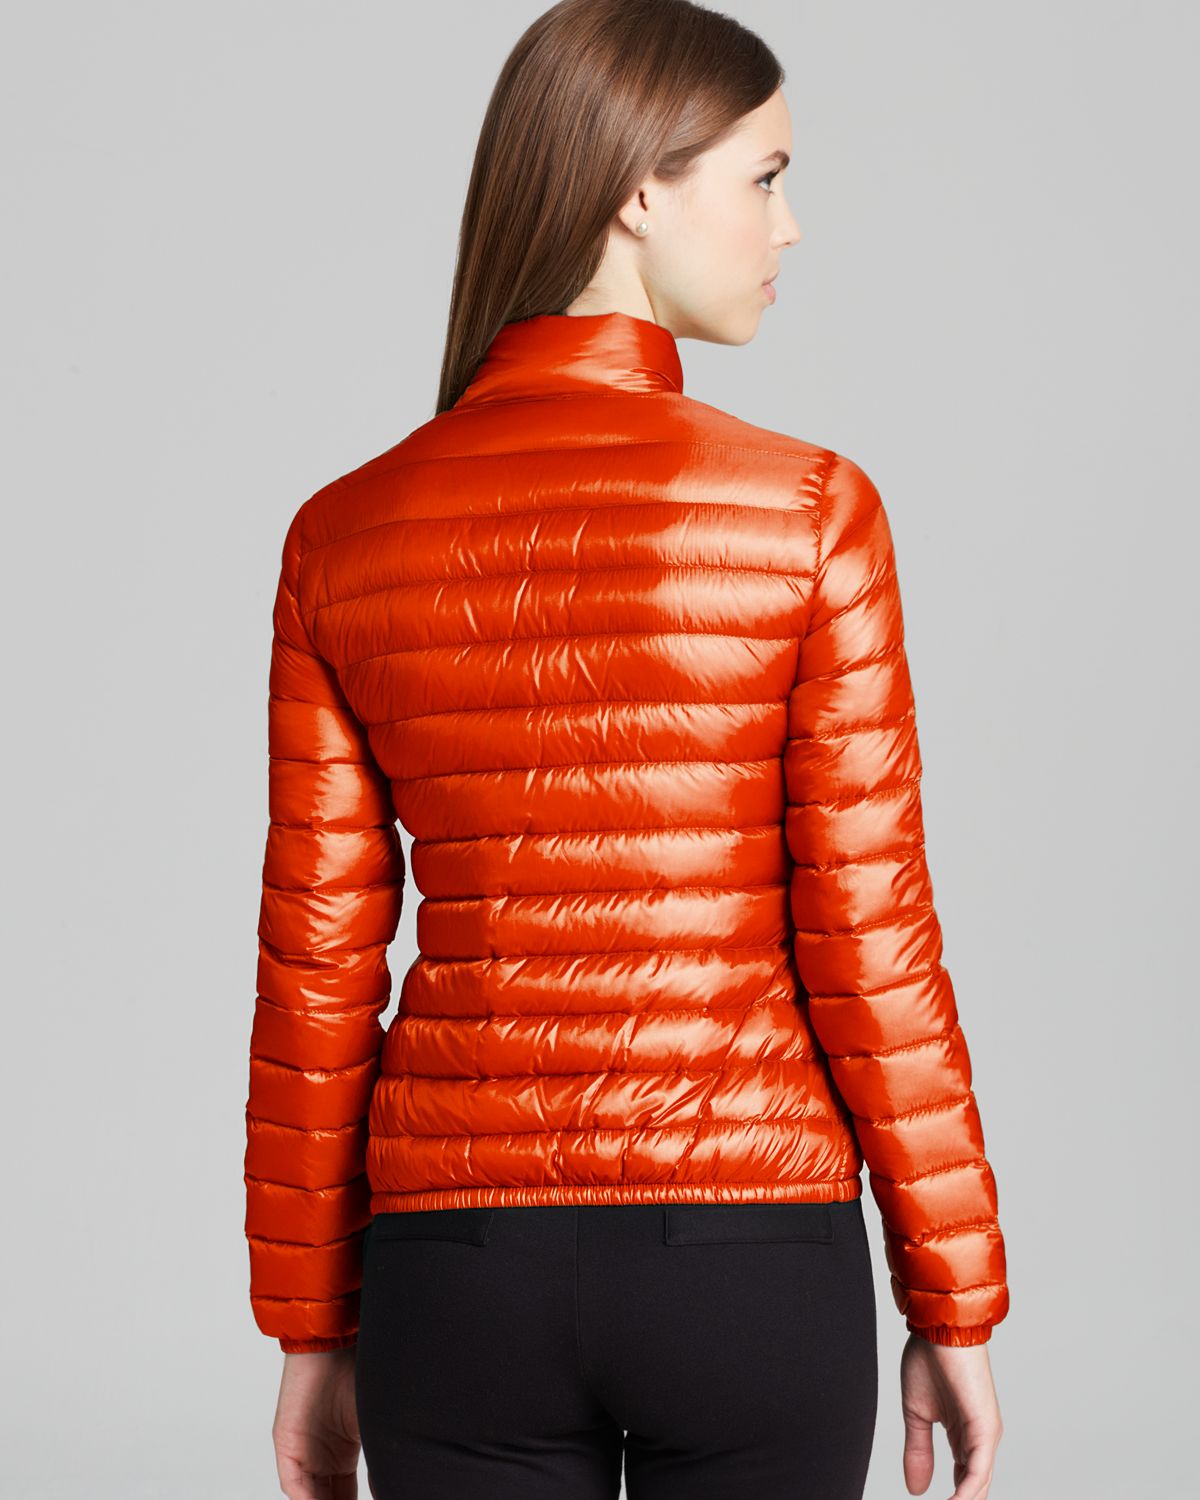 moncler womens lightweight jacket,OFF 79%,www.concordehotels.com.tr